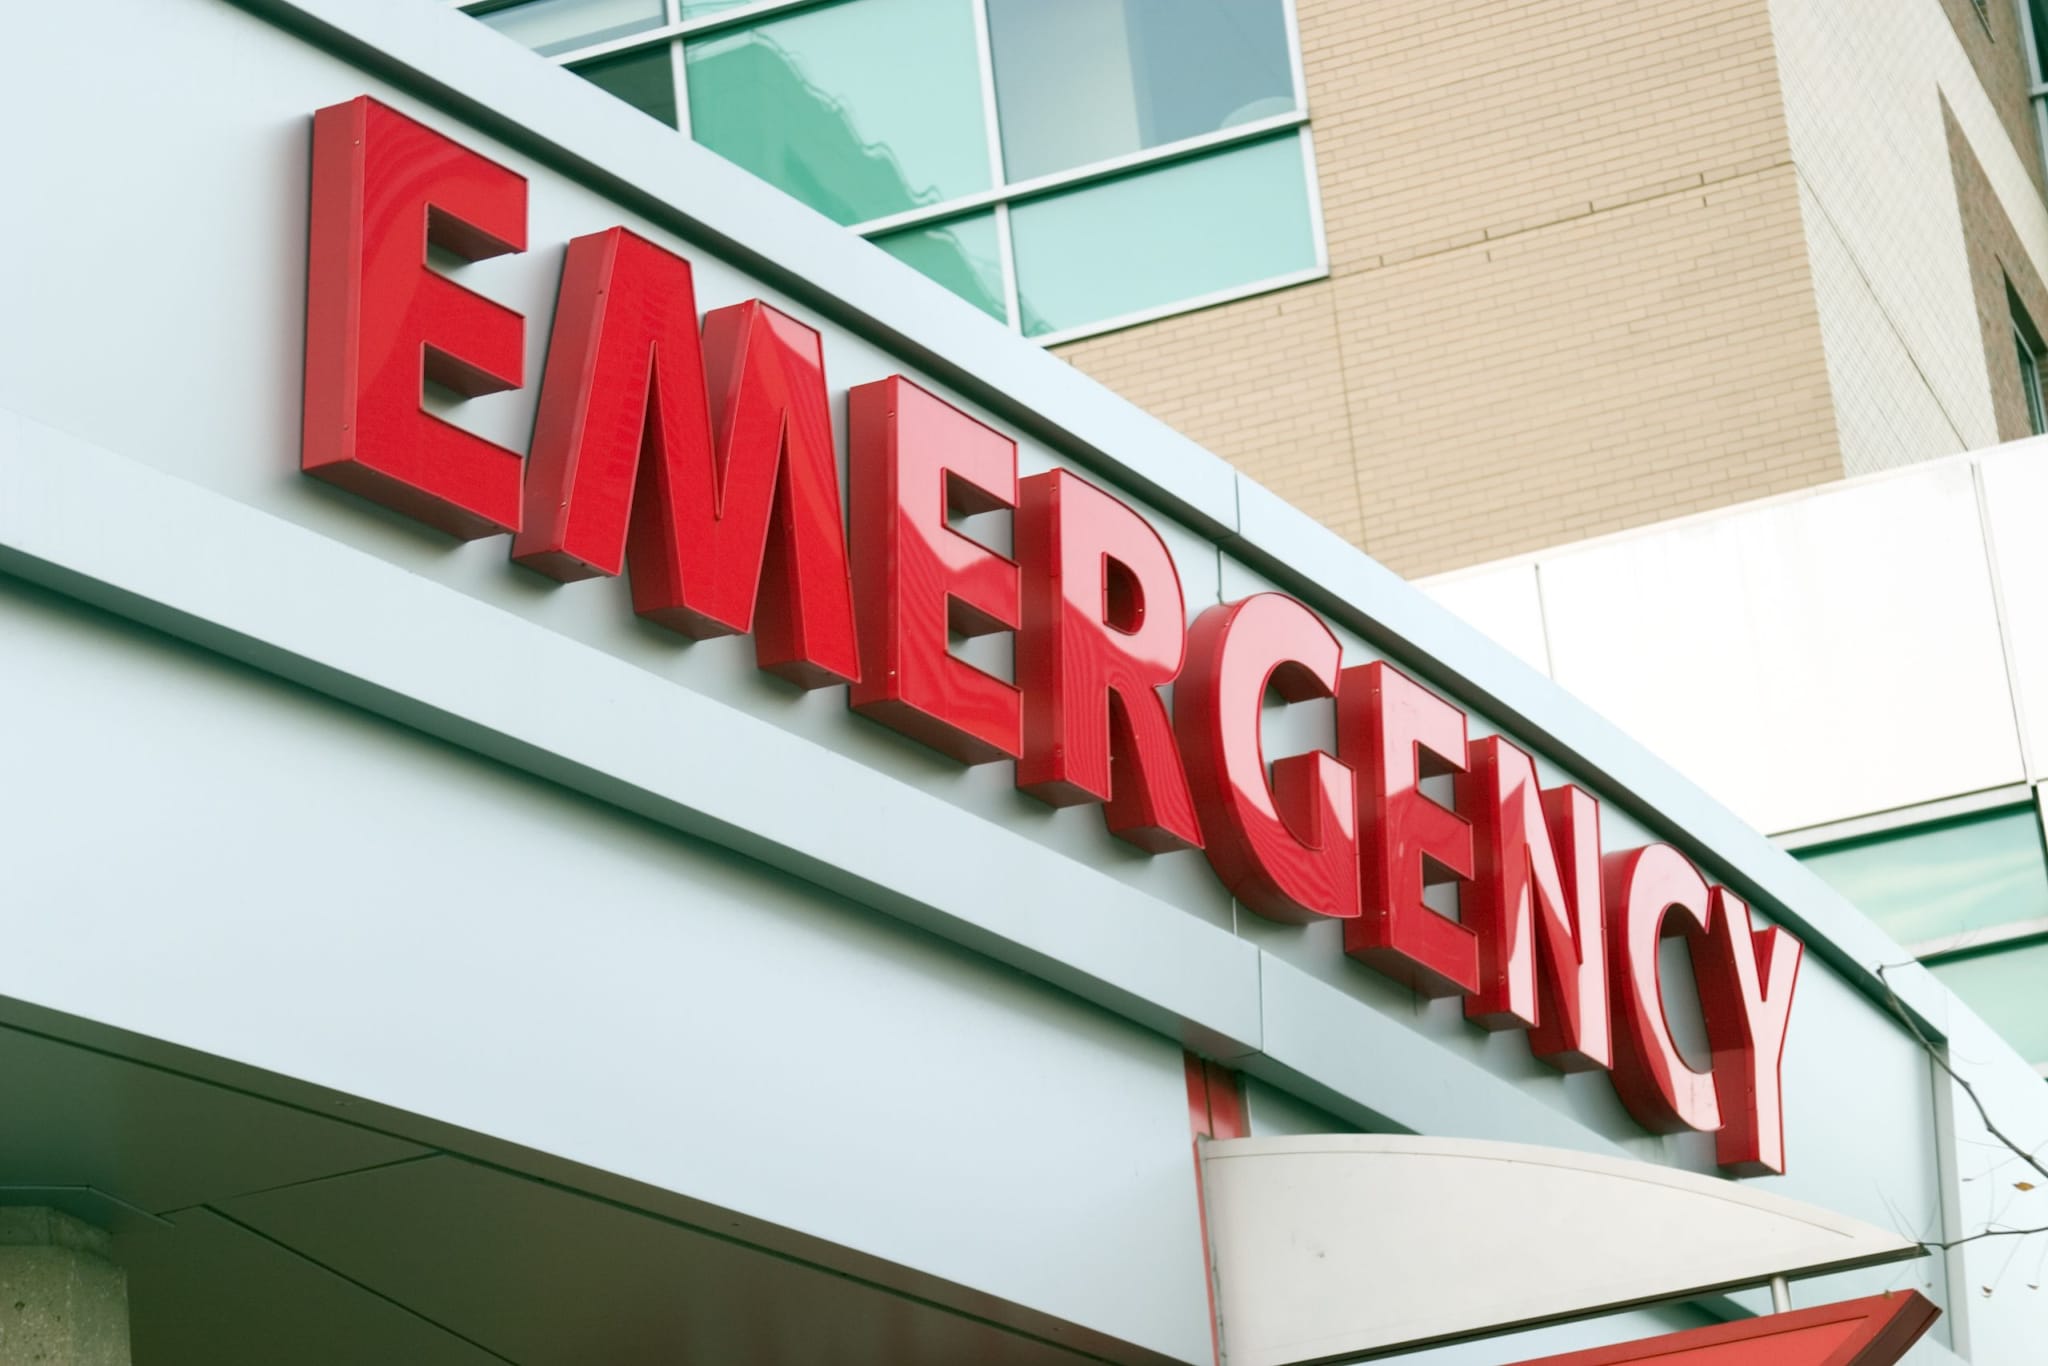 A large red-lettered "Emergency" sign on a hospital façade indicating the entrance to an emergency department